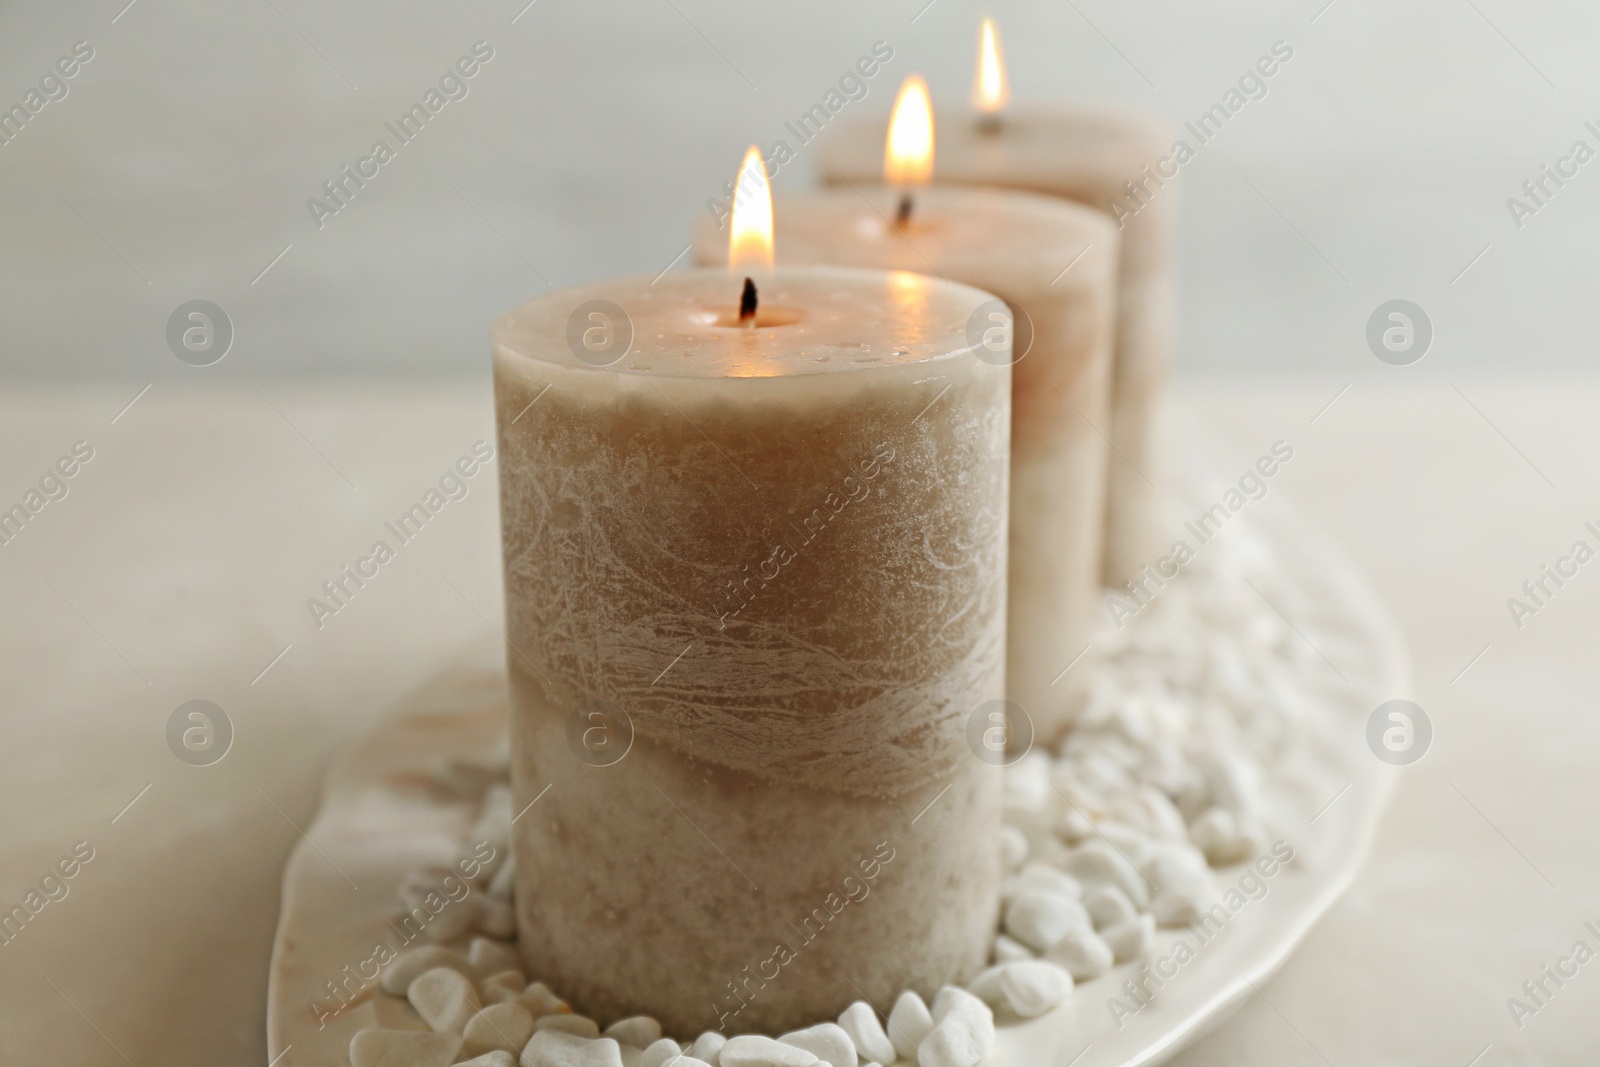 Photo of Plate with three burning candles and rocks on table